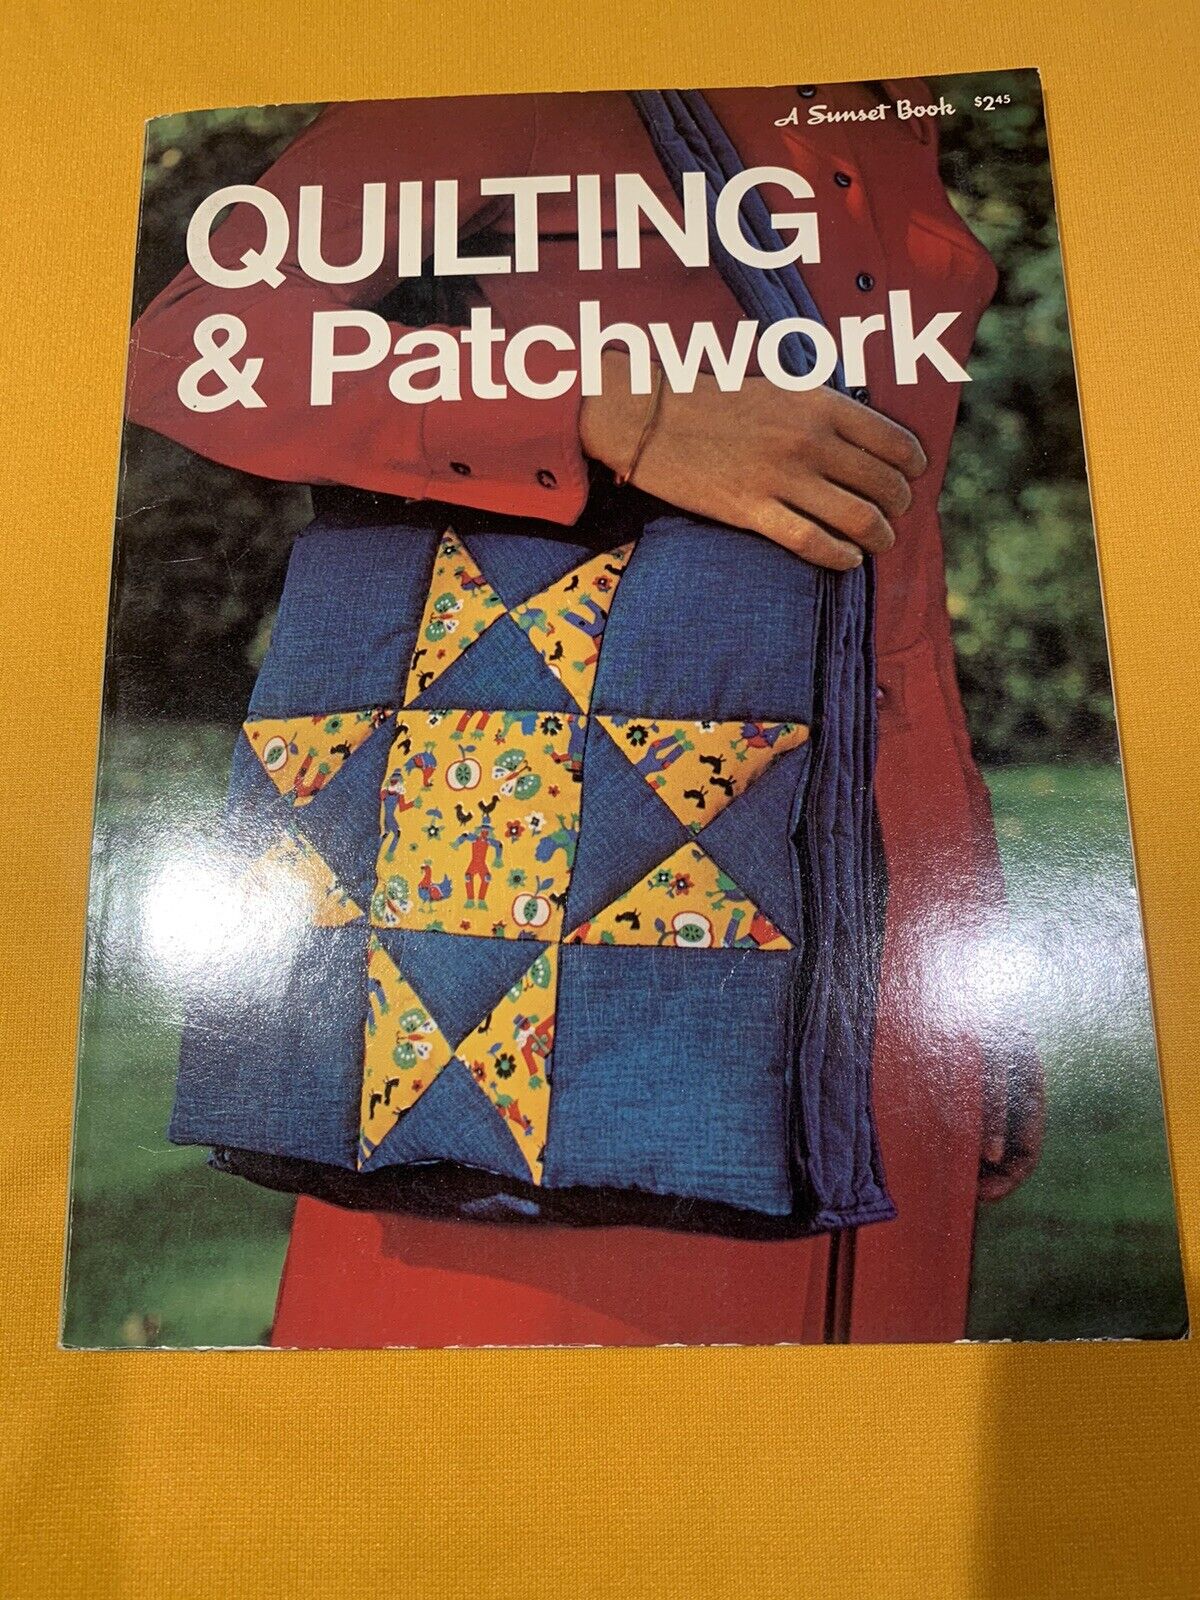 Quilting & Patchwork Sunset Crafts Book Vtg 70s 1974 Patchwork Sewing Machine PB